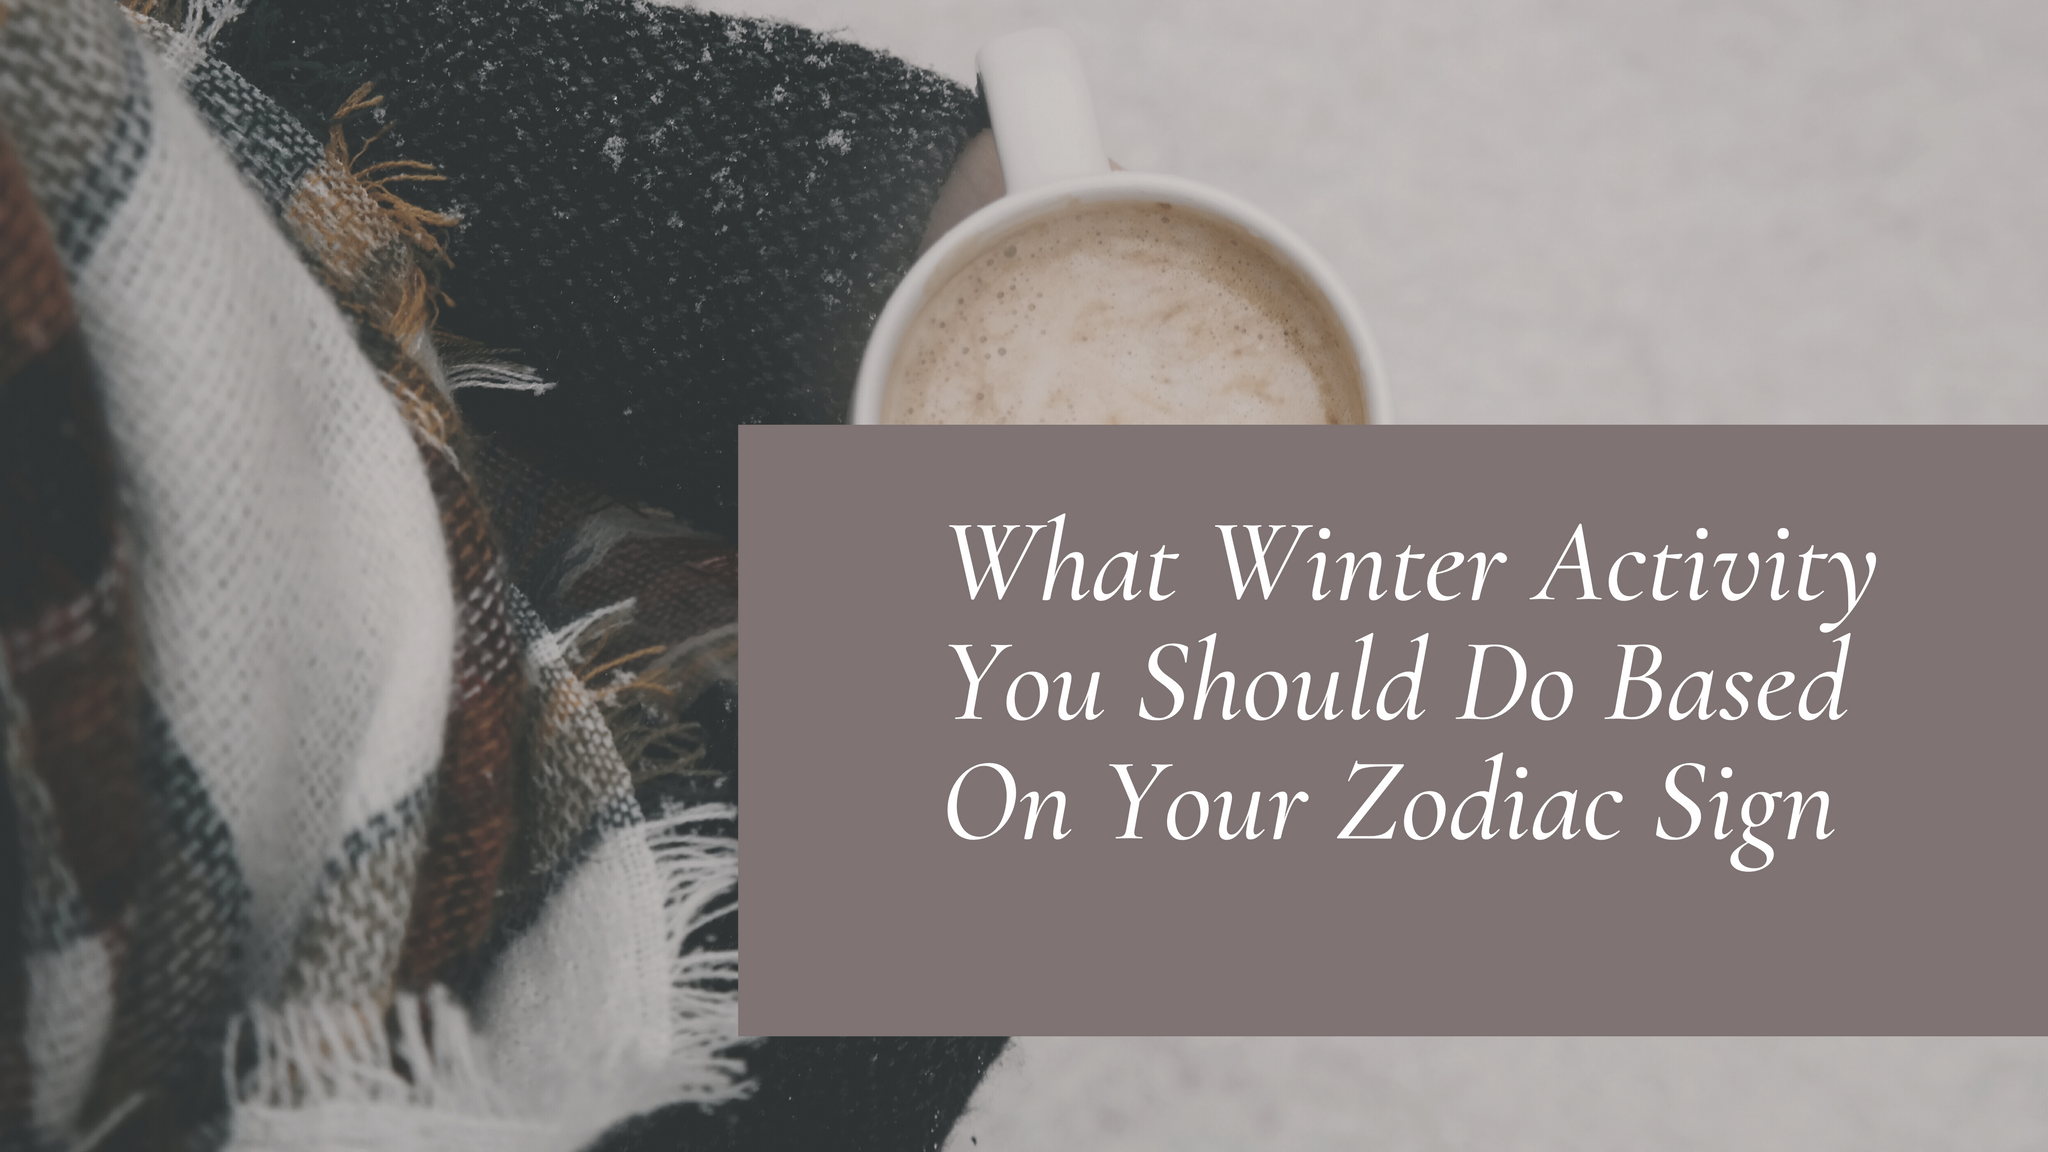 What Winter Activity You Should Do Based on Your Zodiac Sign